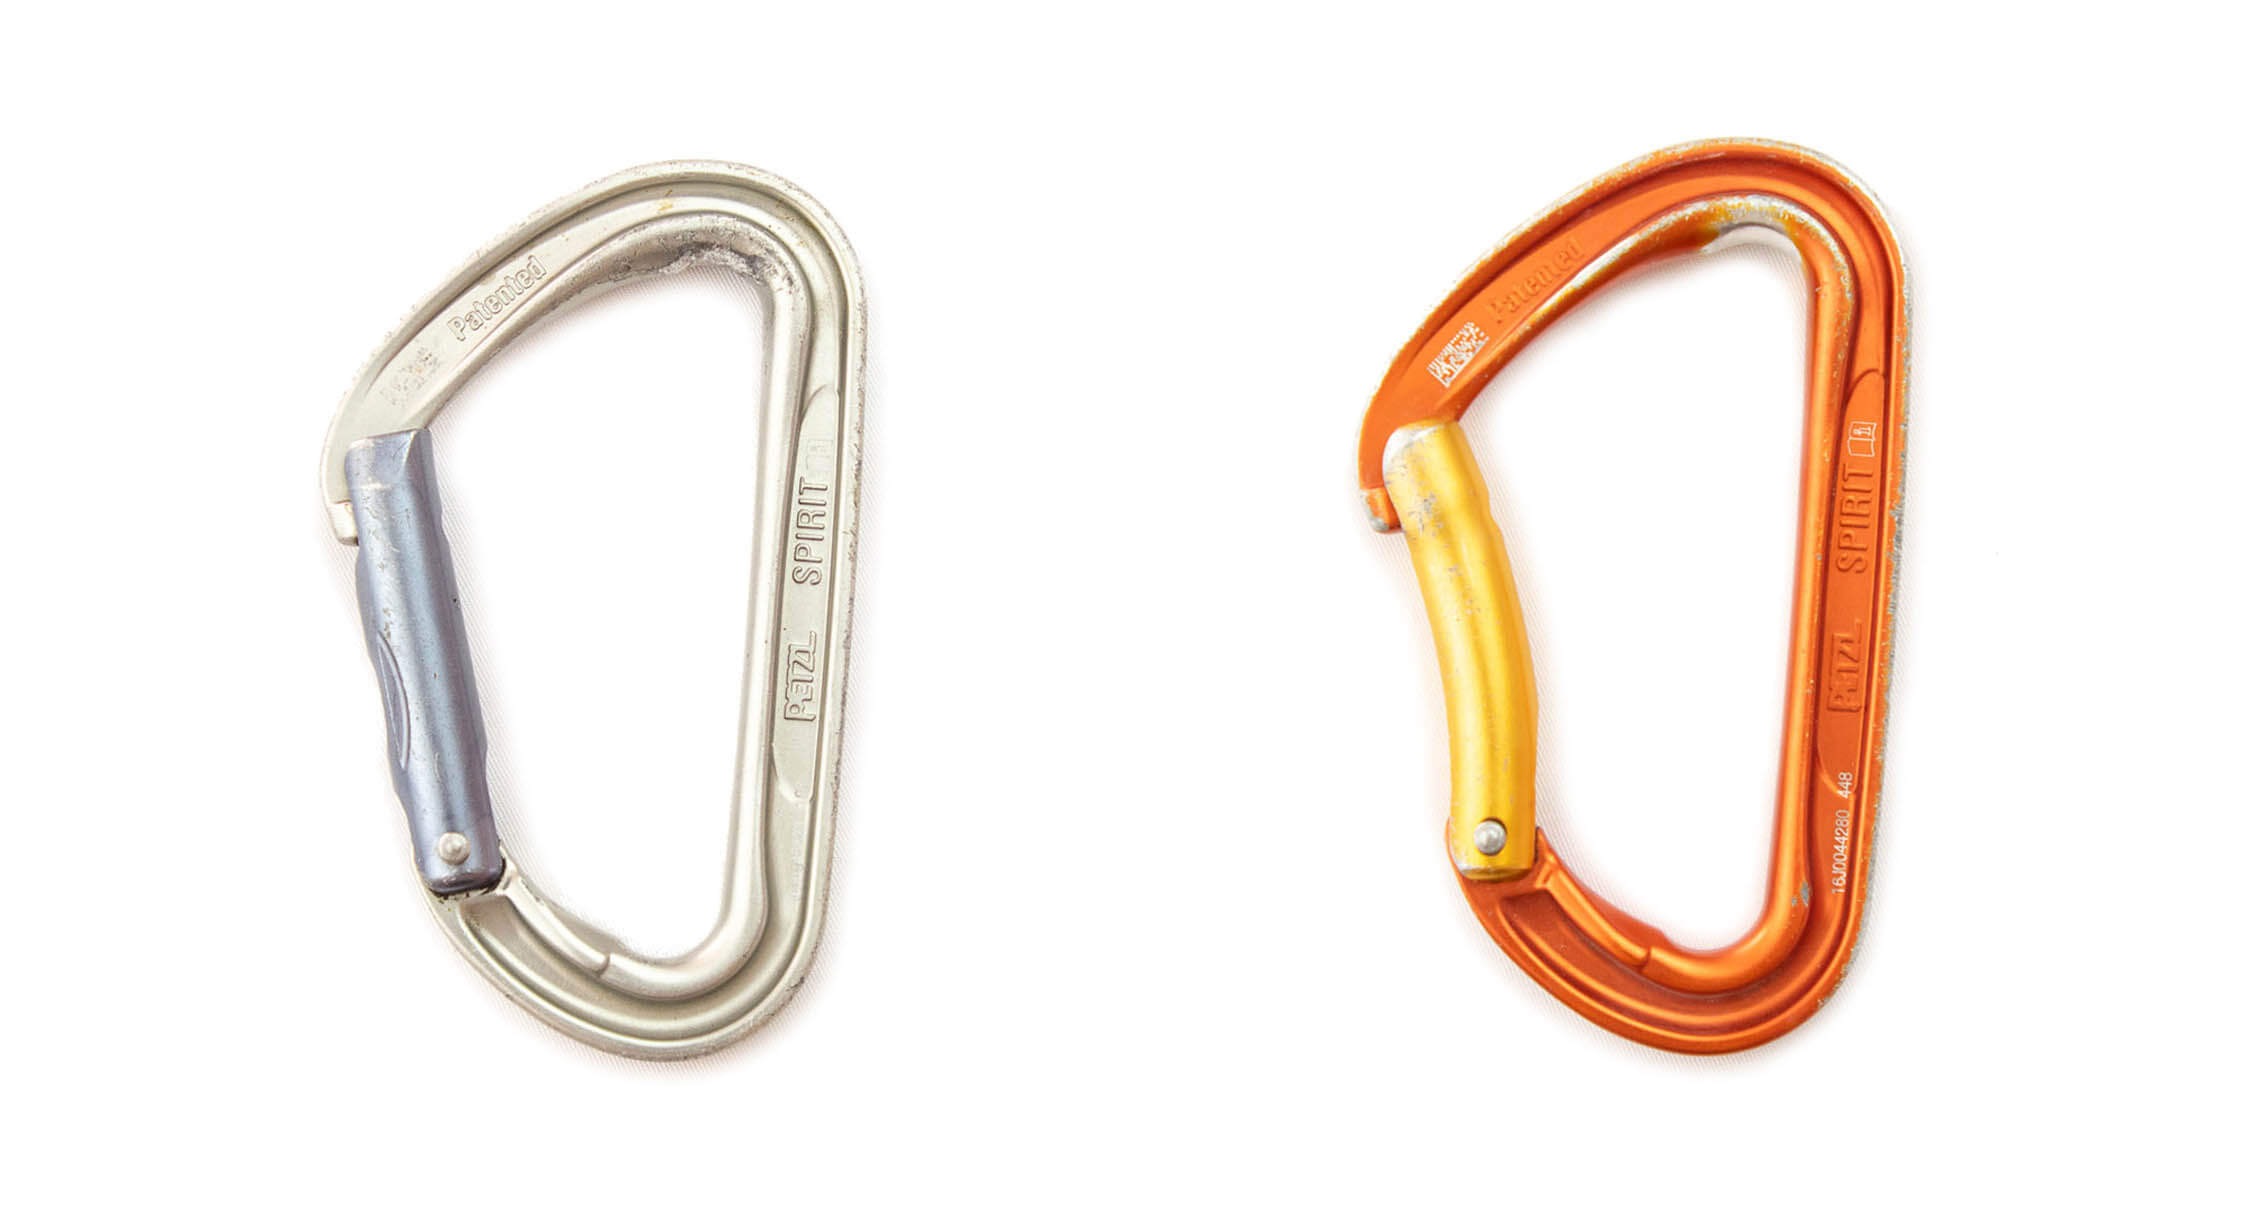 bent and straight gate carabiners